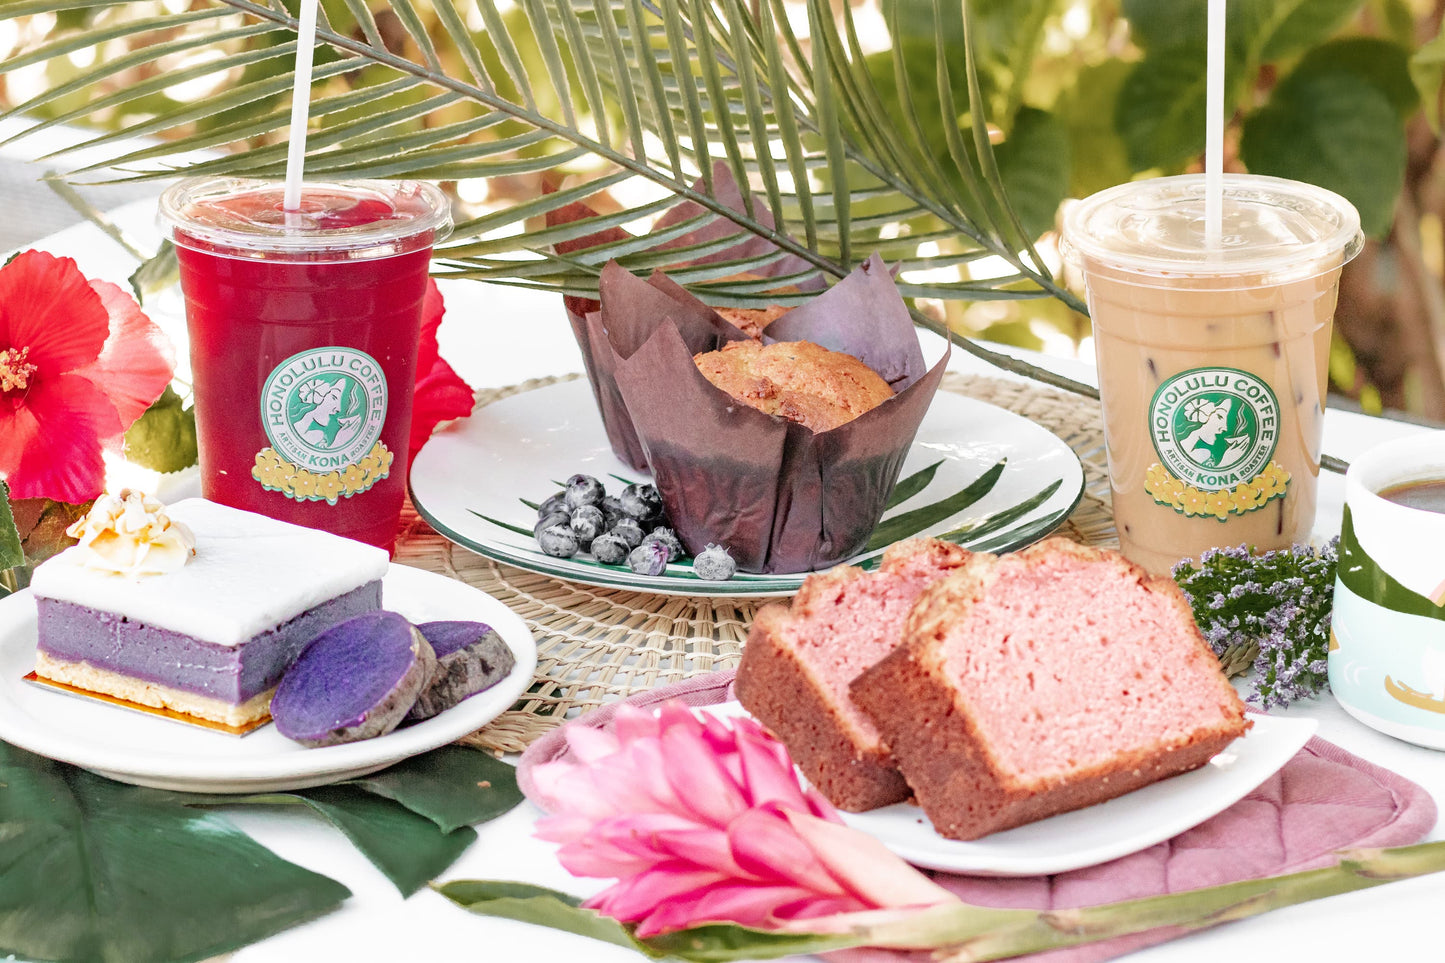 Honolulu Coffee's new springtime seasonal menu with the following items: Sweet Potato Haupia Bar, Hibiscus Spritzer, Blueberry Corn Muffin, Guava Bread, and Lavender Latte